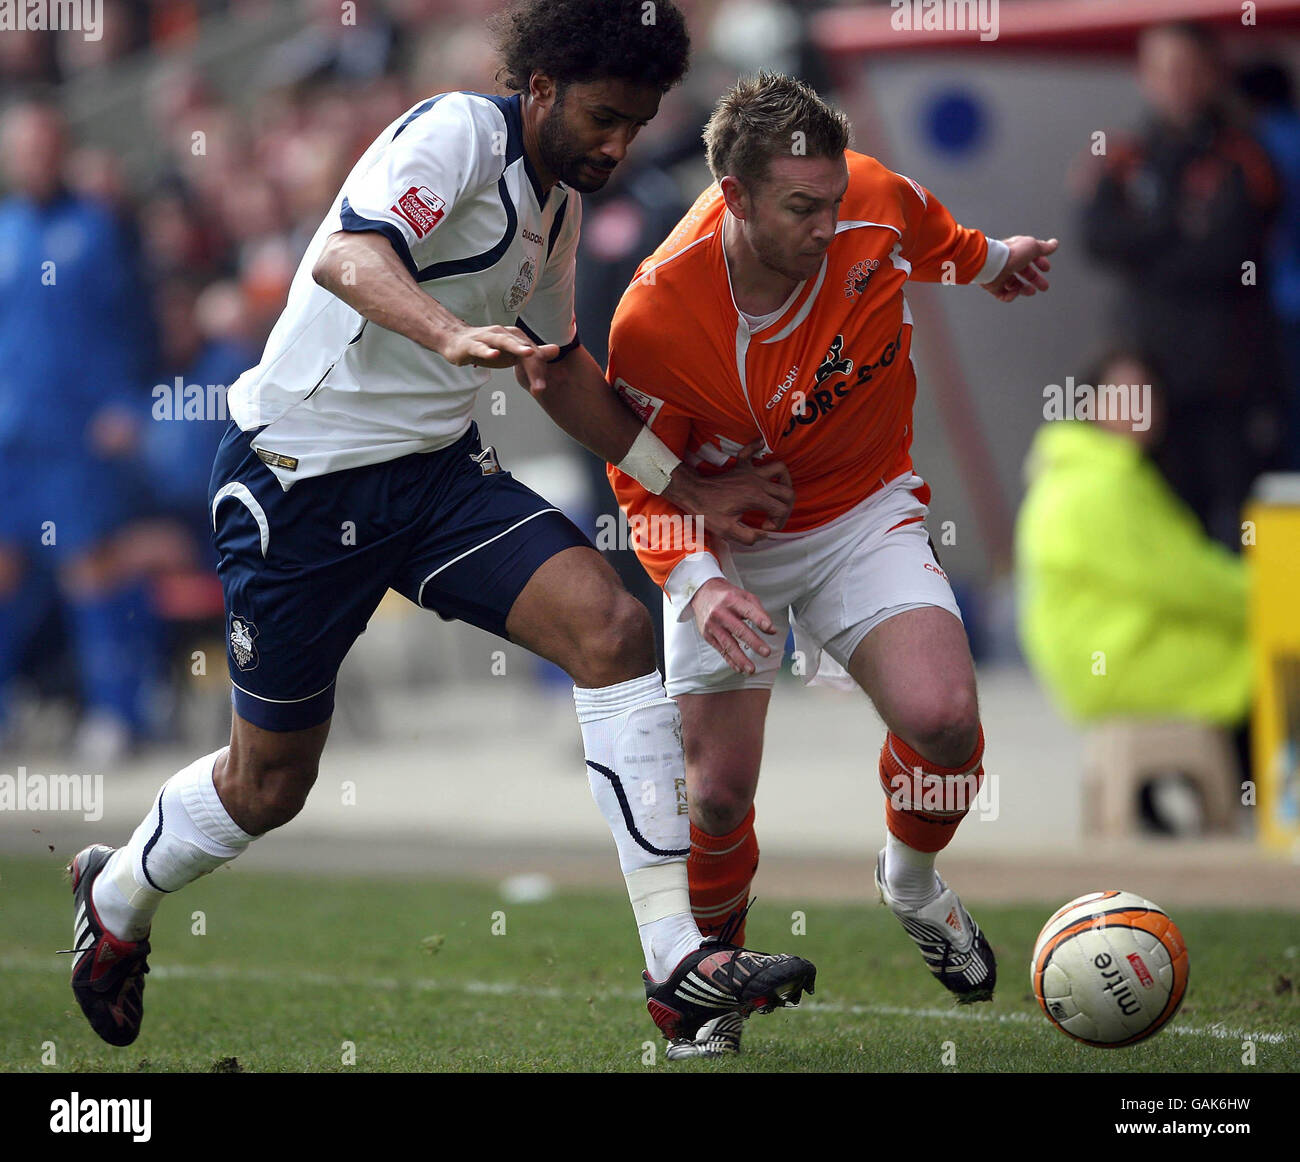 Blackpool's Stephen McPhee (r) and Preston's Youl Mawene battle for the ball during the Coca-Cola Championship match at Bloomfield Road, Blackpool. Stock Photo